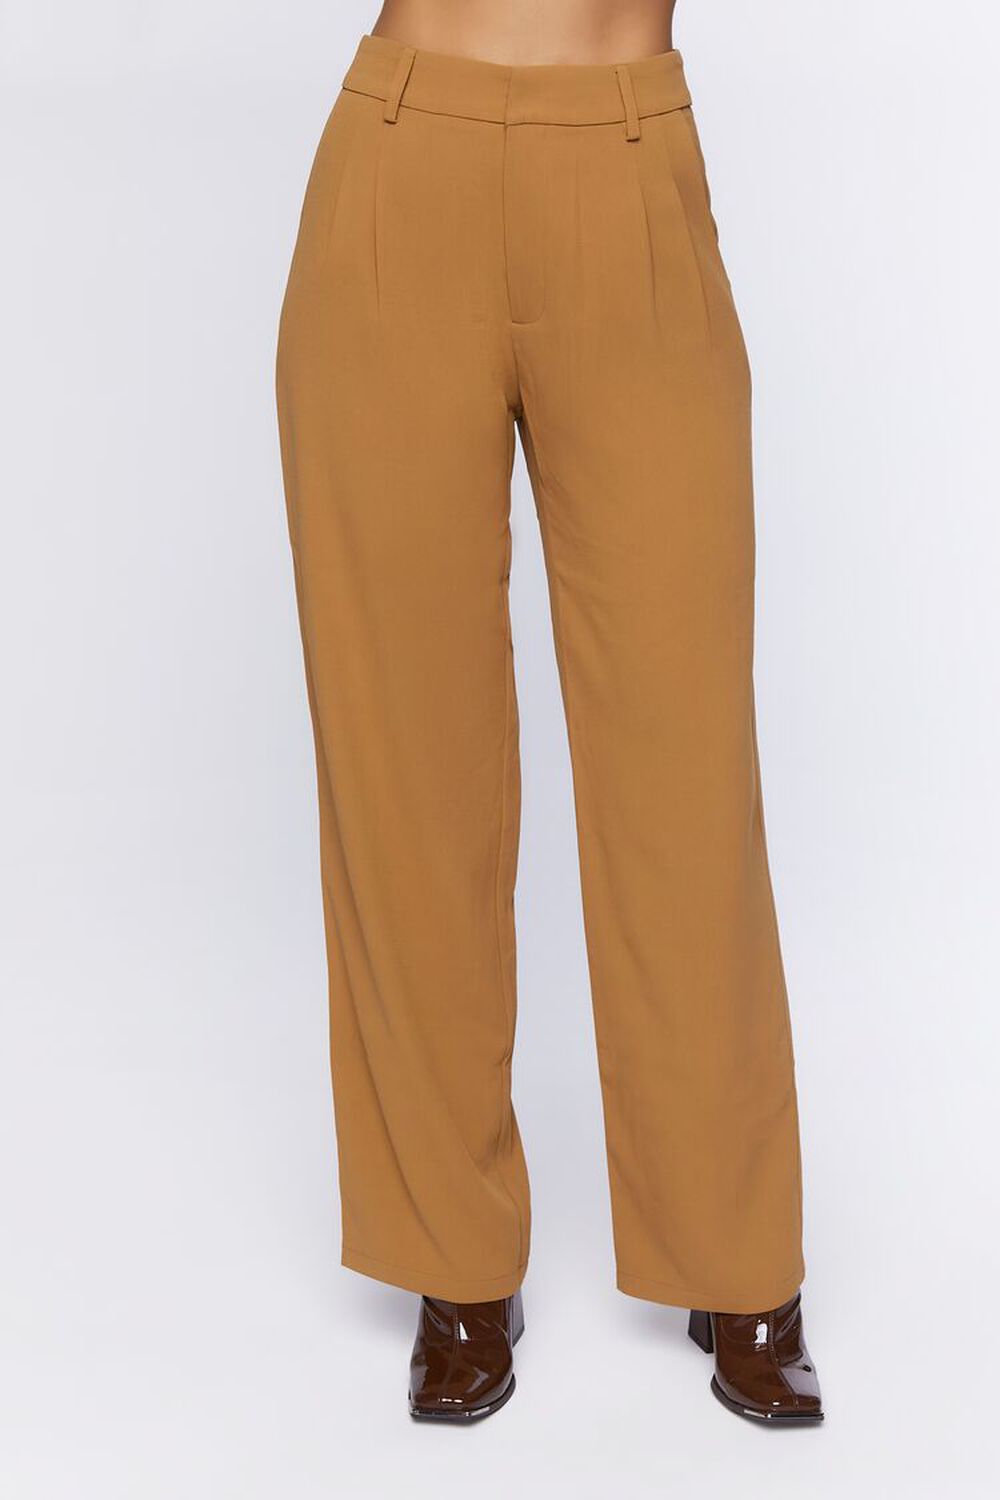 TAUPE Mid-Rise Straight-Leg Trousers, image 2